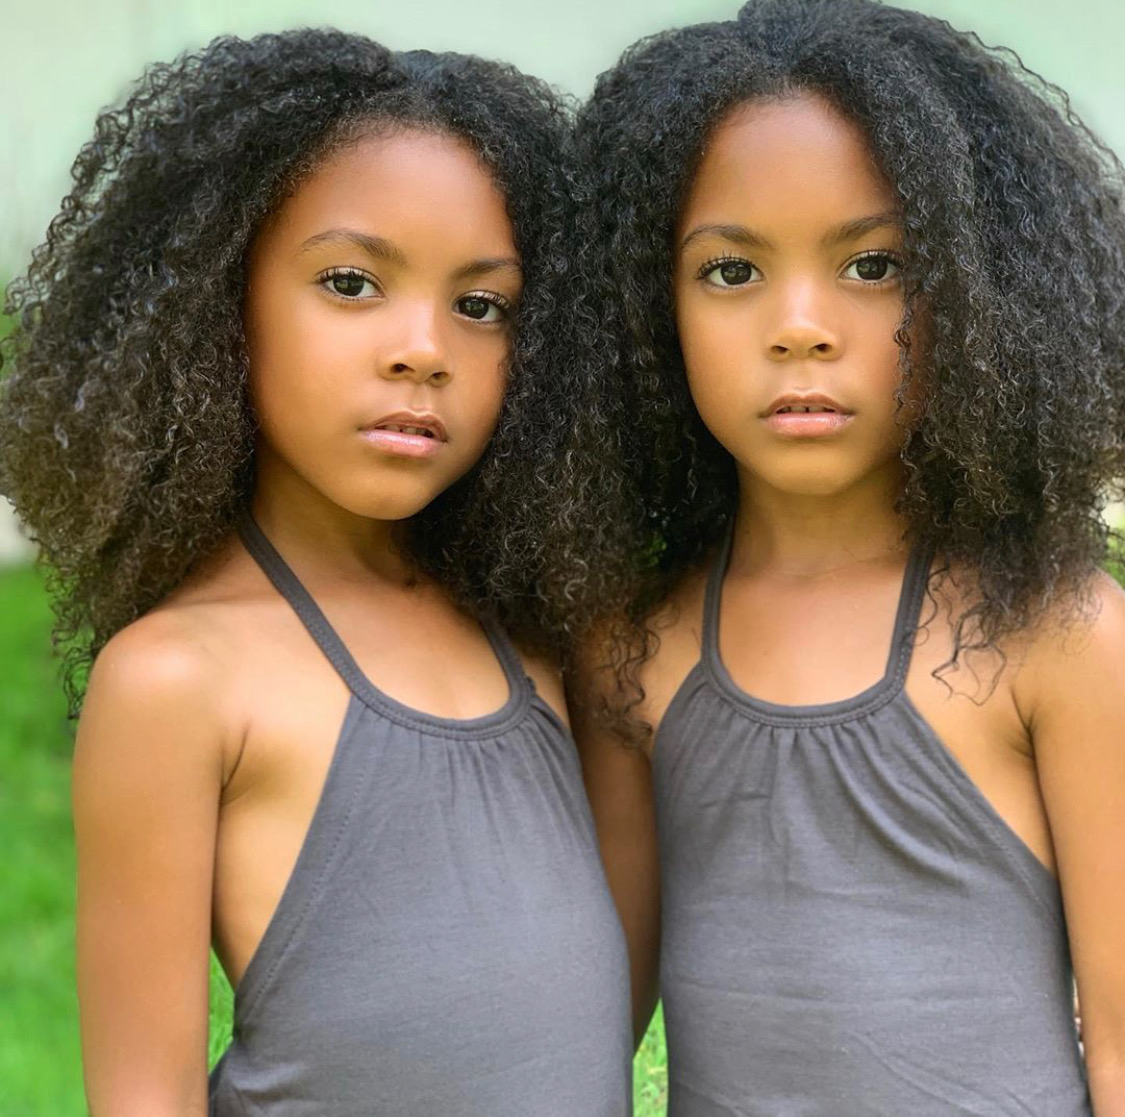 among-identical-twins-with-autism-the-severity-of-symptoms-varies